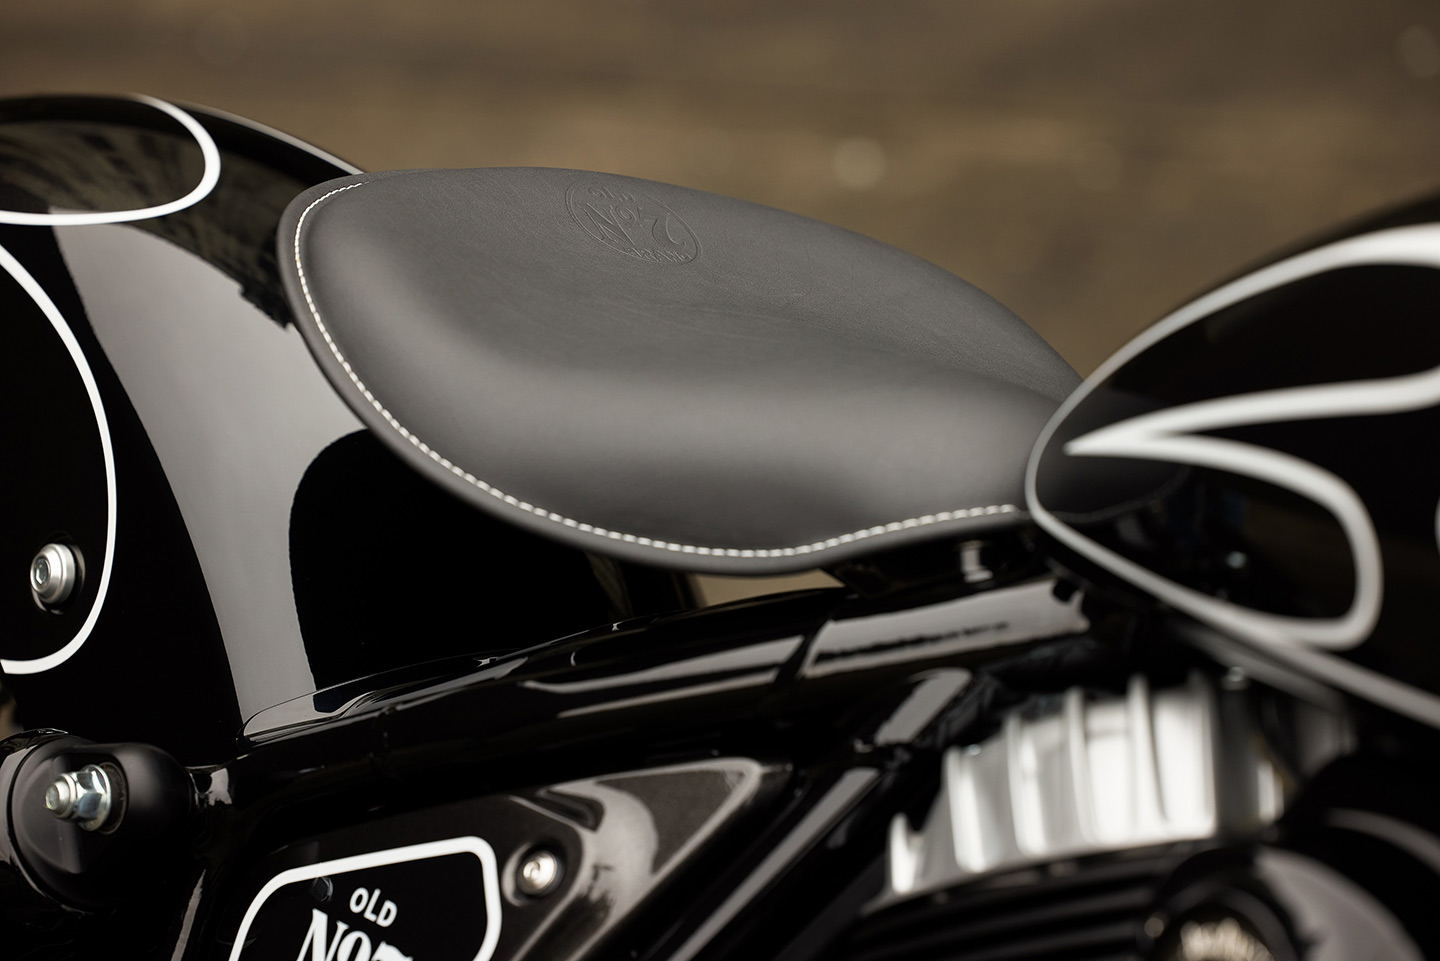 Indian and Jack Daniel's New Motorcycle Has Whiskey in Its Paint